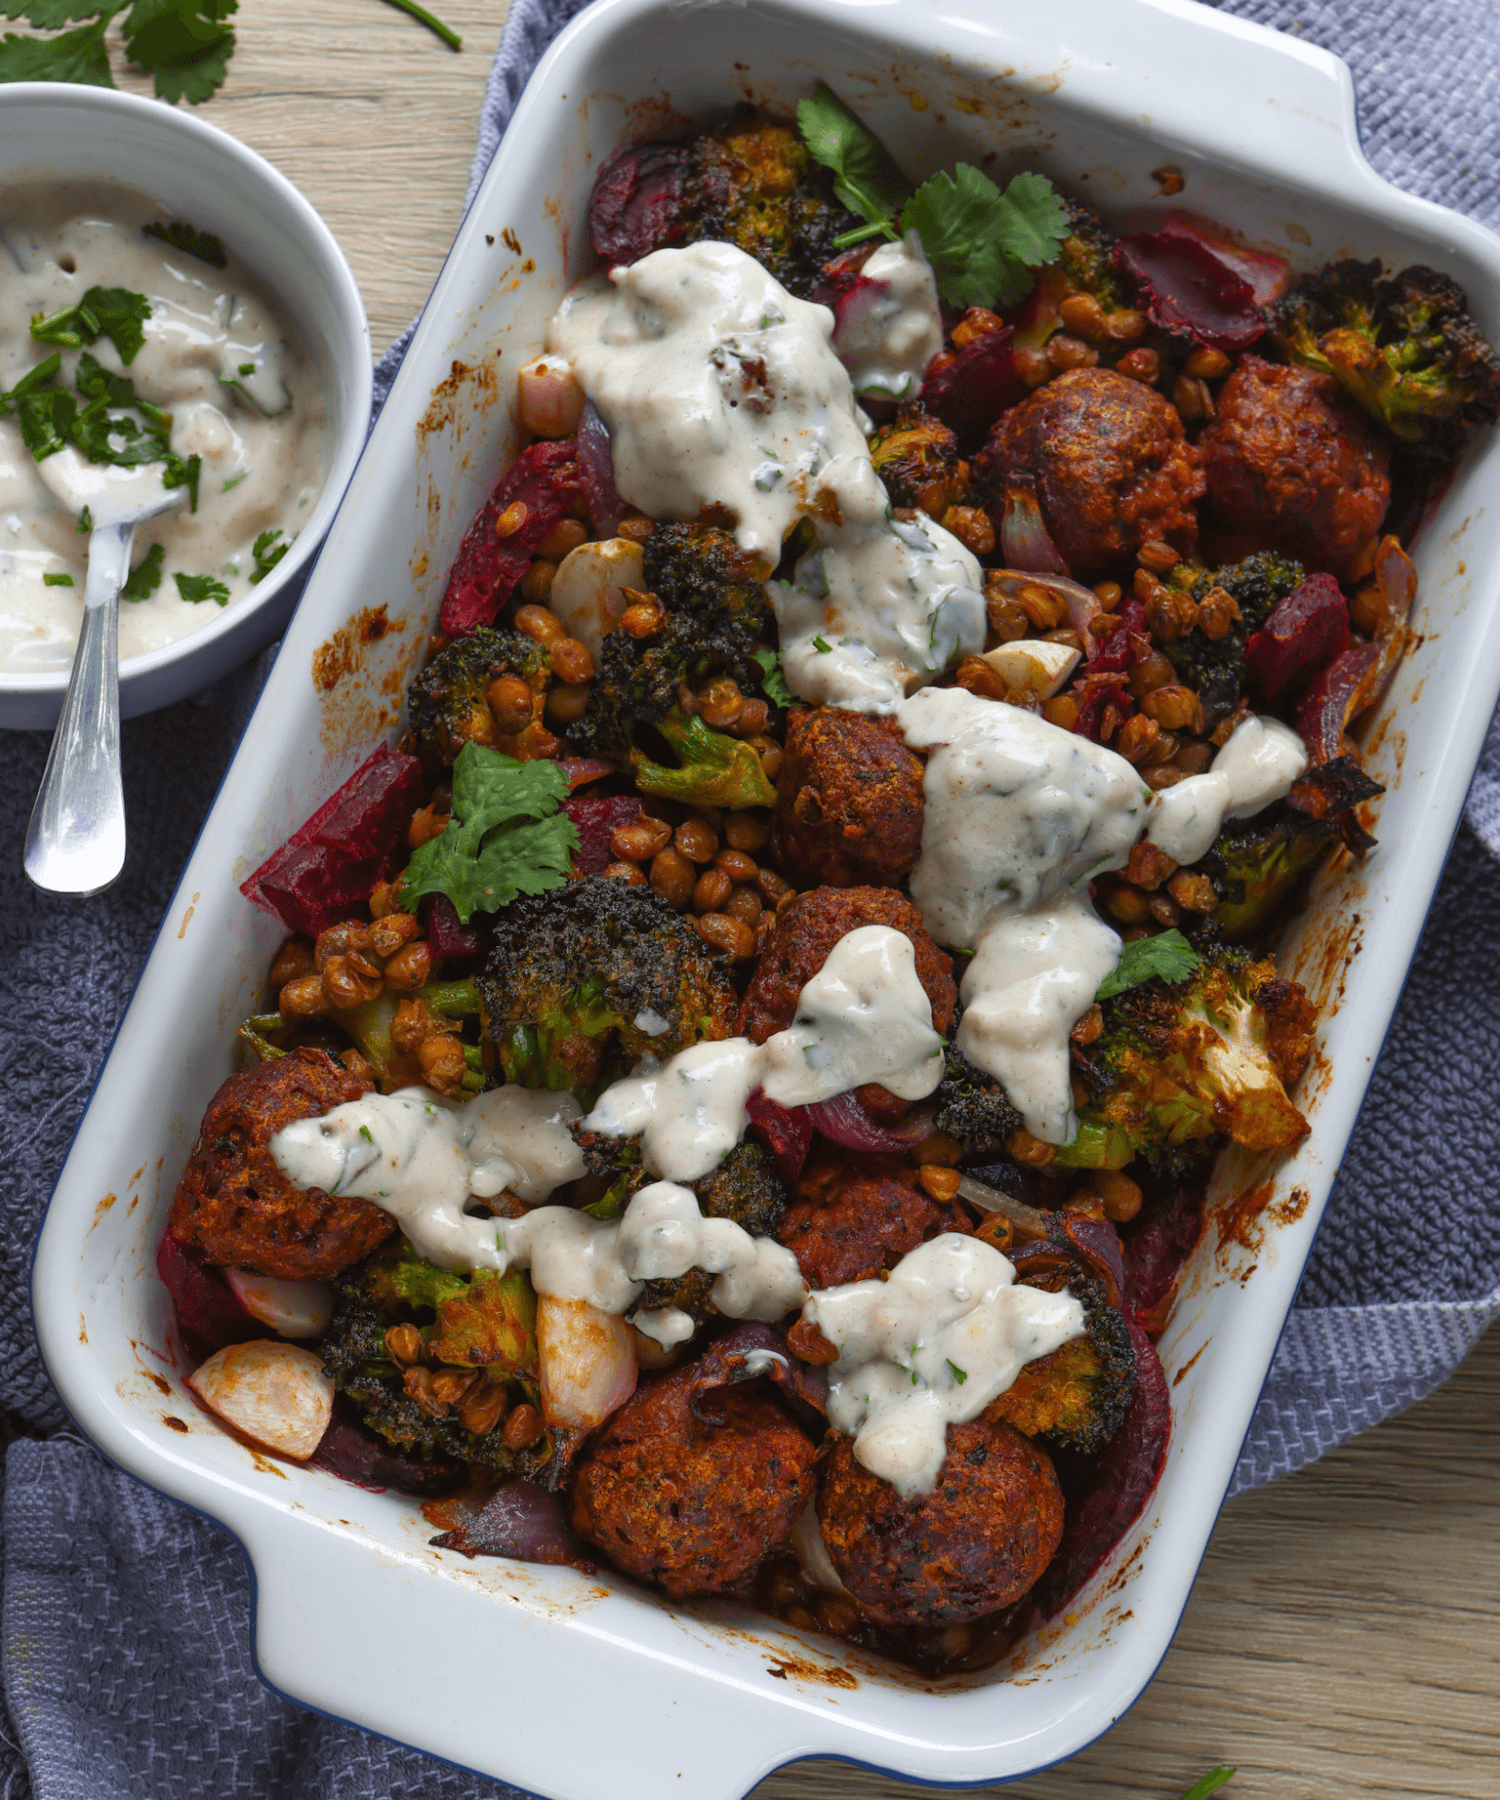 Meatball, Beetroot, and Lentil Bake